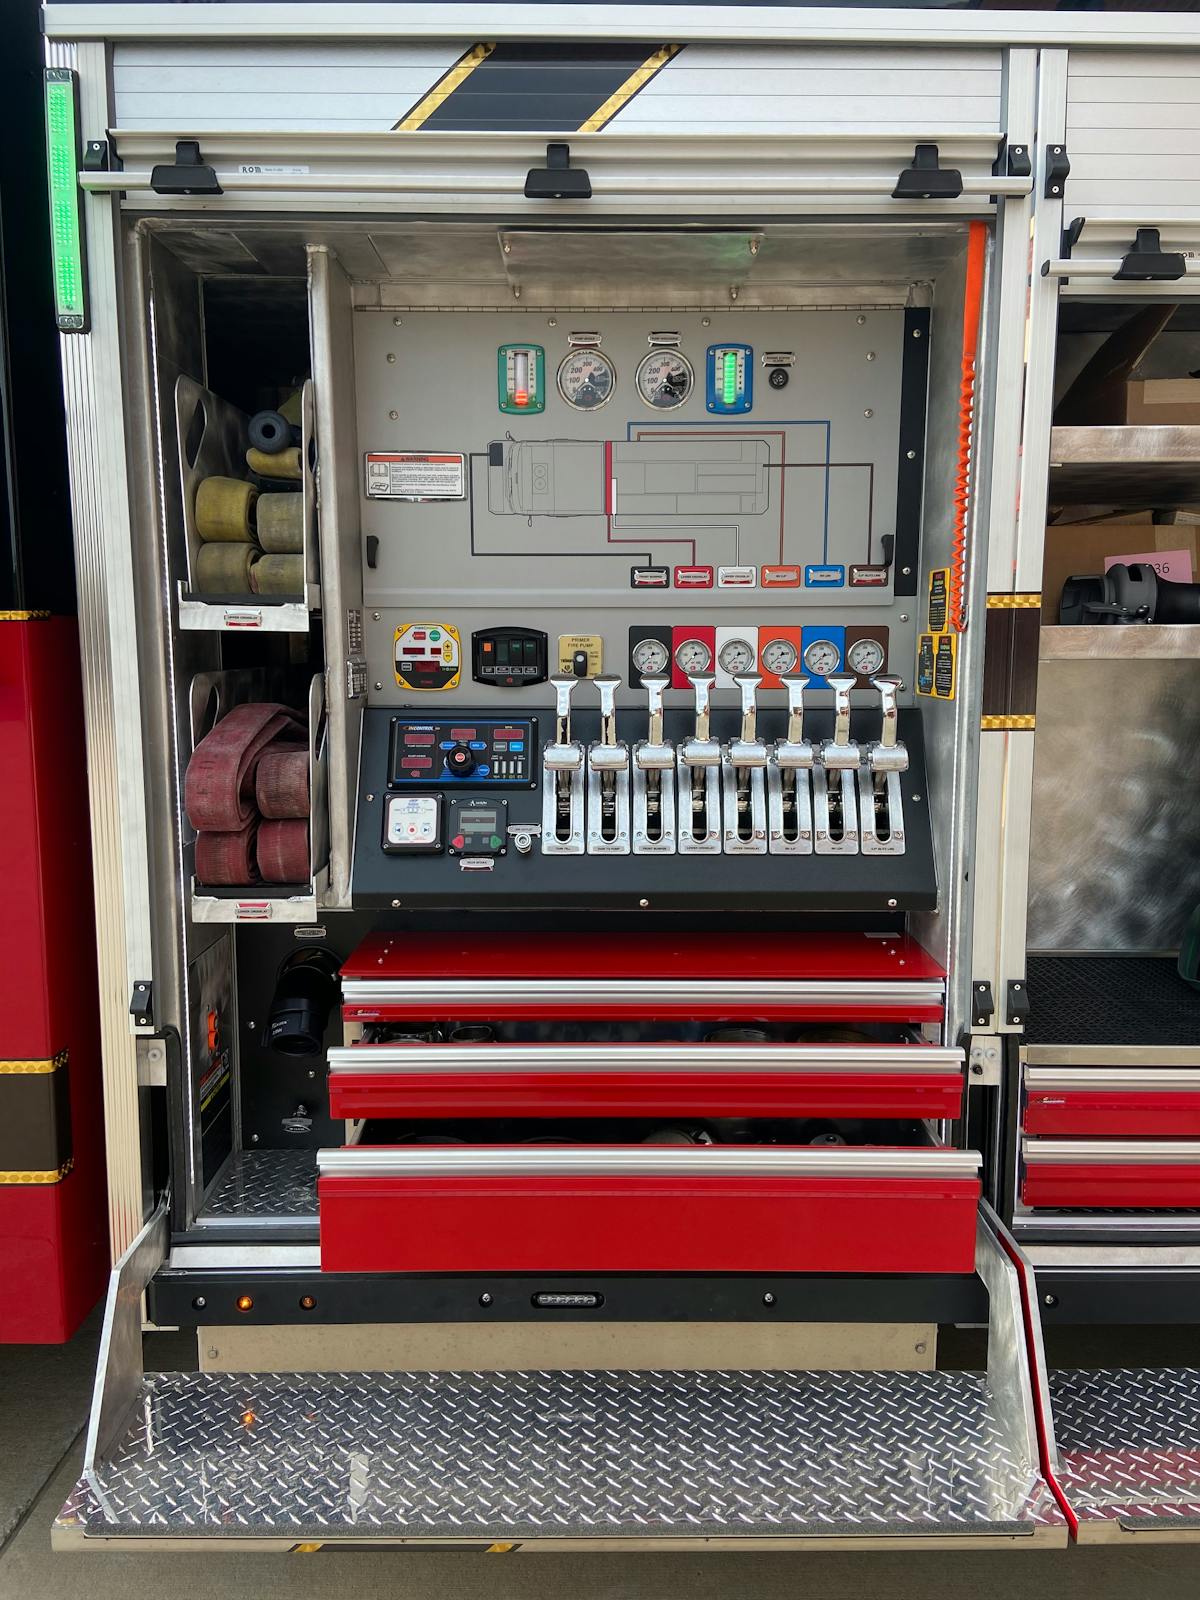 By using a consortium purchasing process, the pump panel was able to be configured nearly identical to a previously purchased apparatus. This includes discharge colors, valve handle style, and orientation of all pump operator controls.